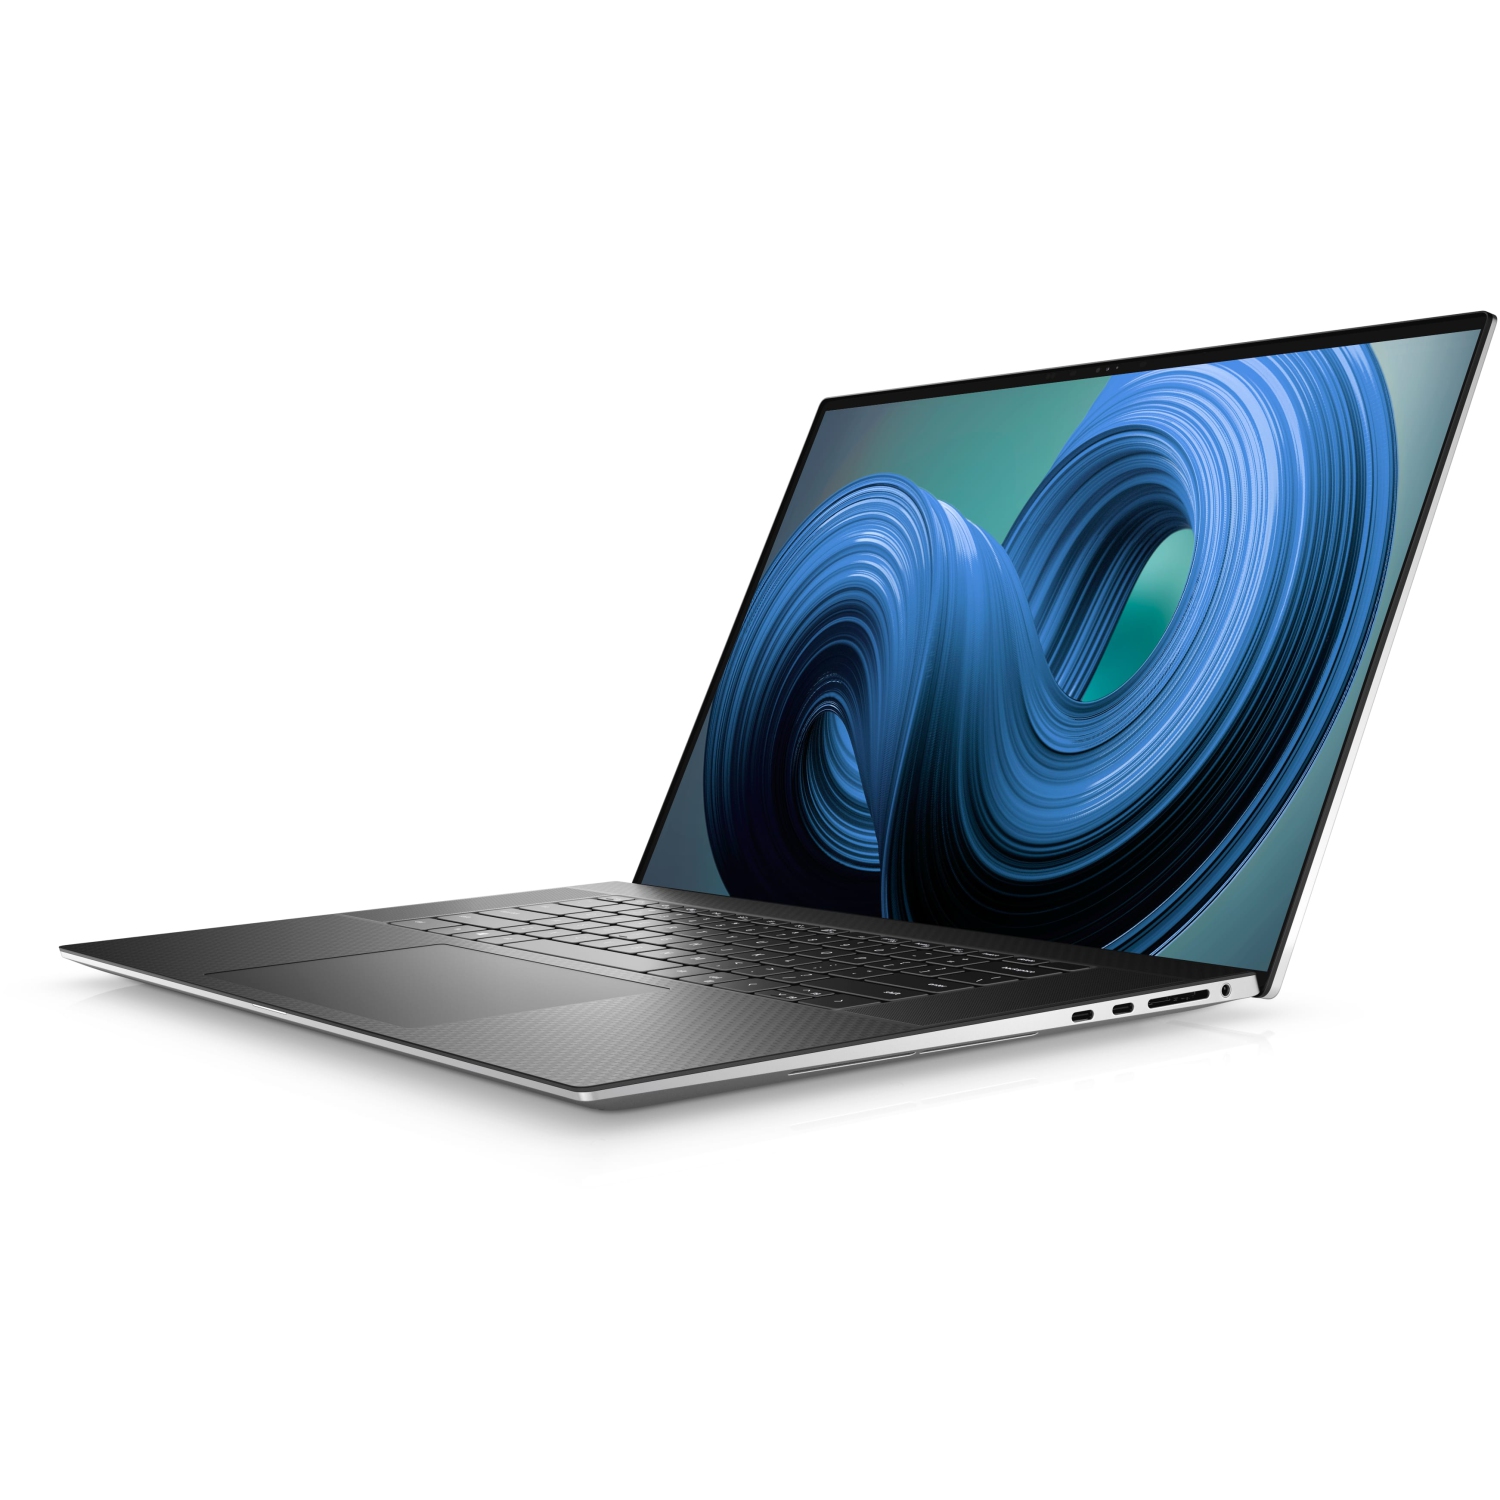 Refurbished (Excellent) – Dell XPS 9720 Laptop (2022) | 17" 4K Touch | Core i7 - 512GB SSD - 64GB RAM - RTX 3050 | 14 Cores @ 4.7 GHz - 12th Gen CPU